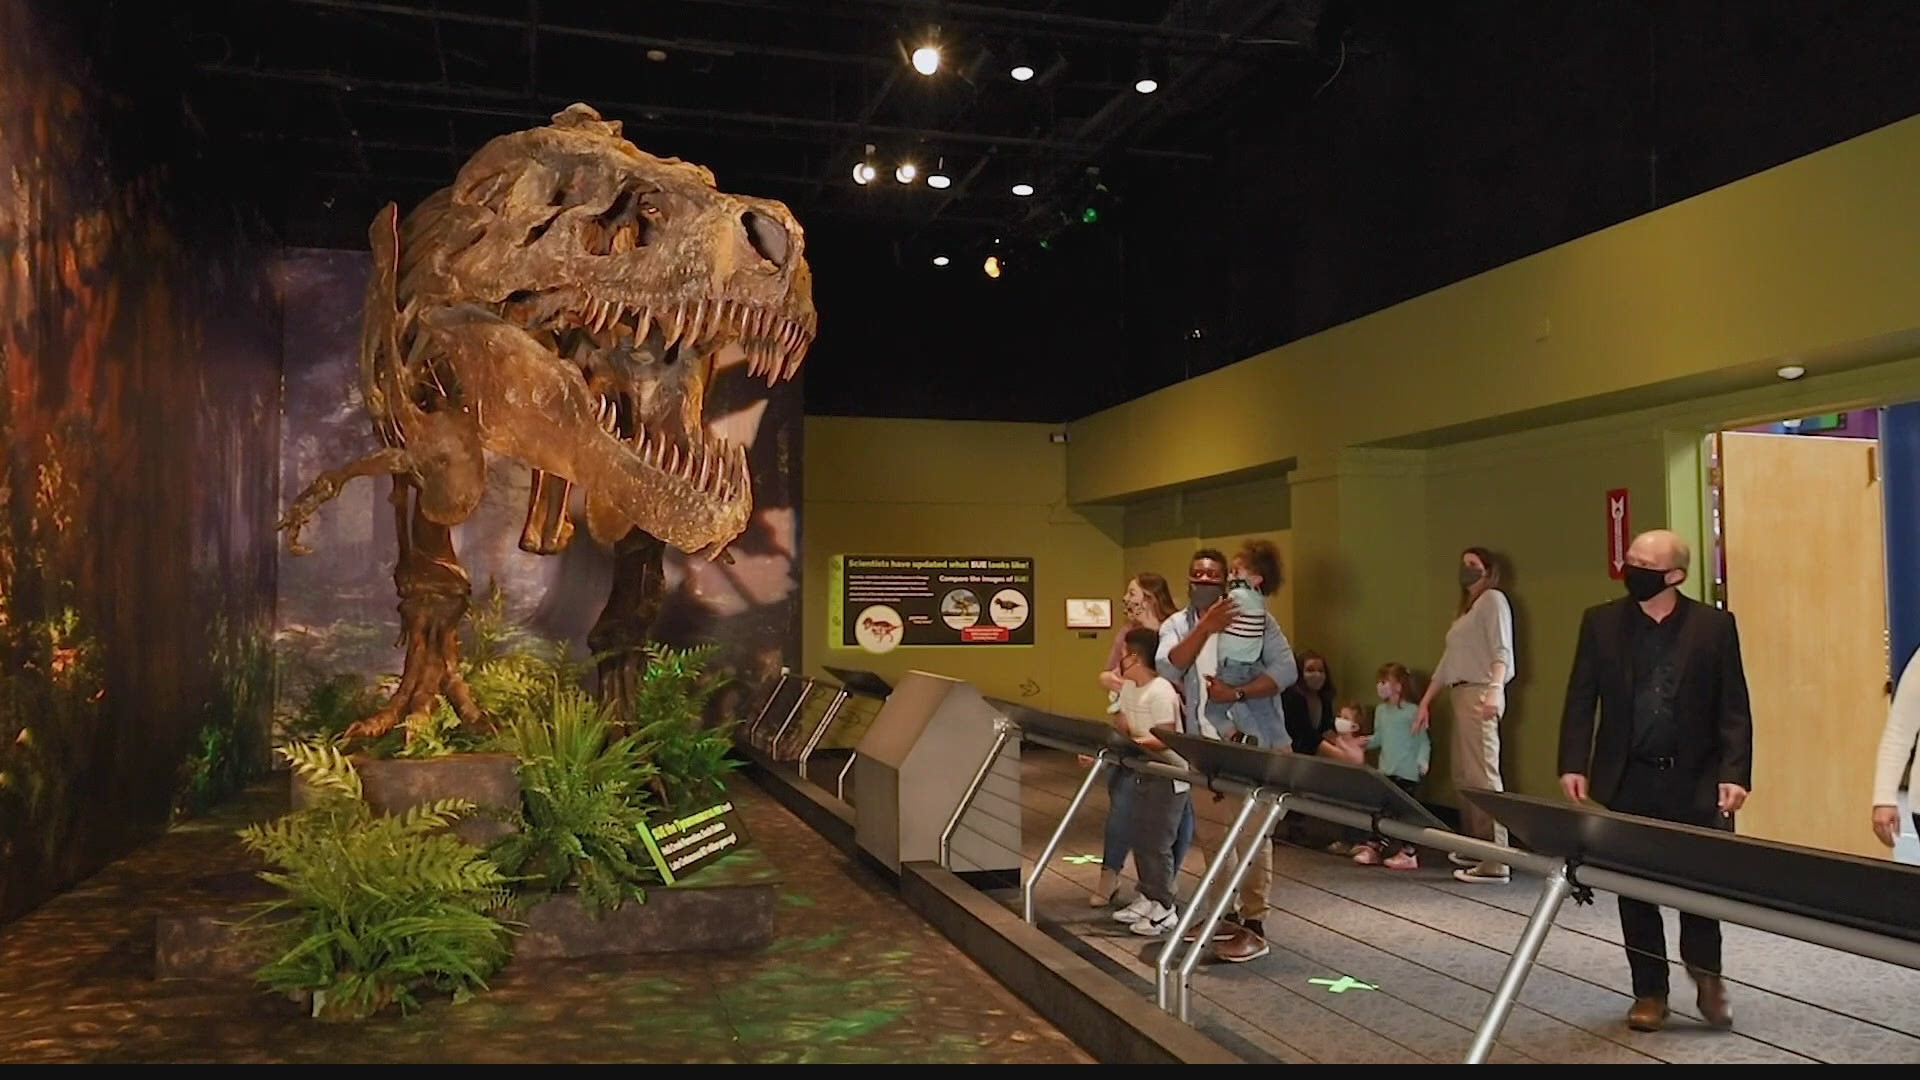 "SUE" will be joined alongside "Bucky" in the museum's atrium as the Dinosphere exhibit undergoes a 'dinormous' $27.5 million redesign.